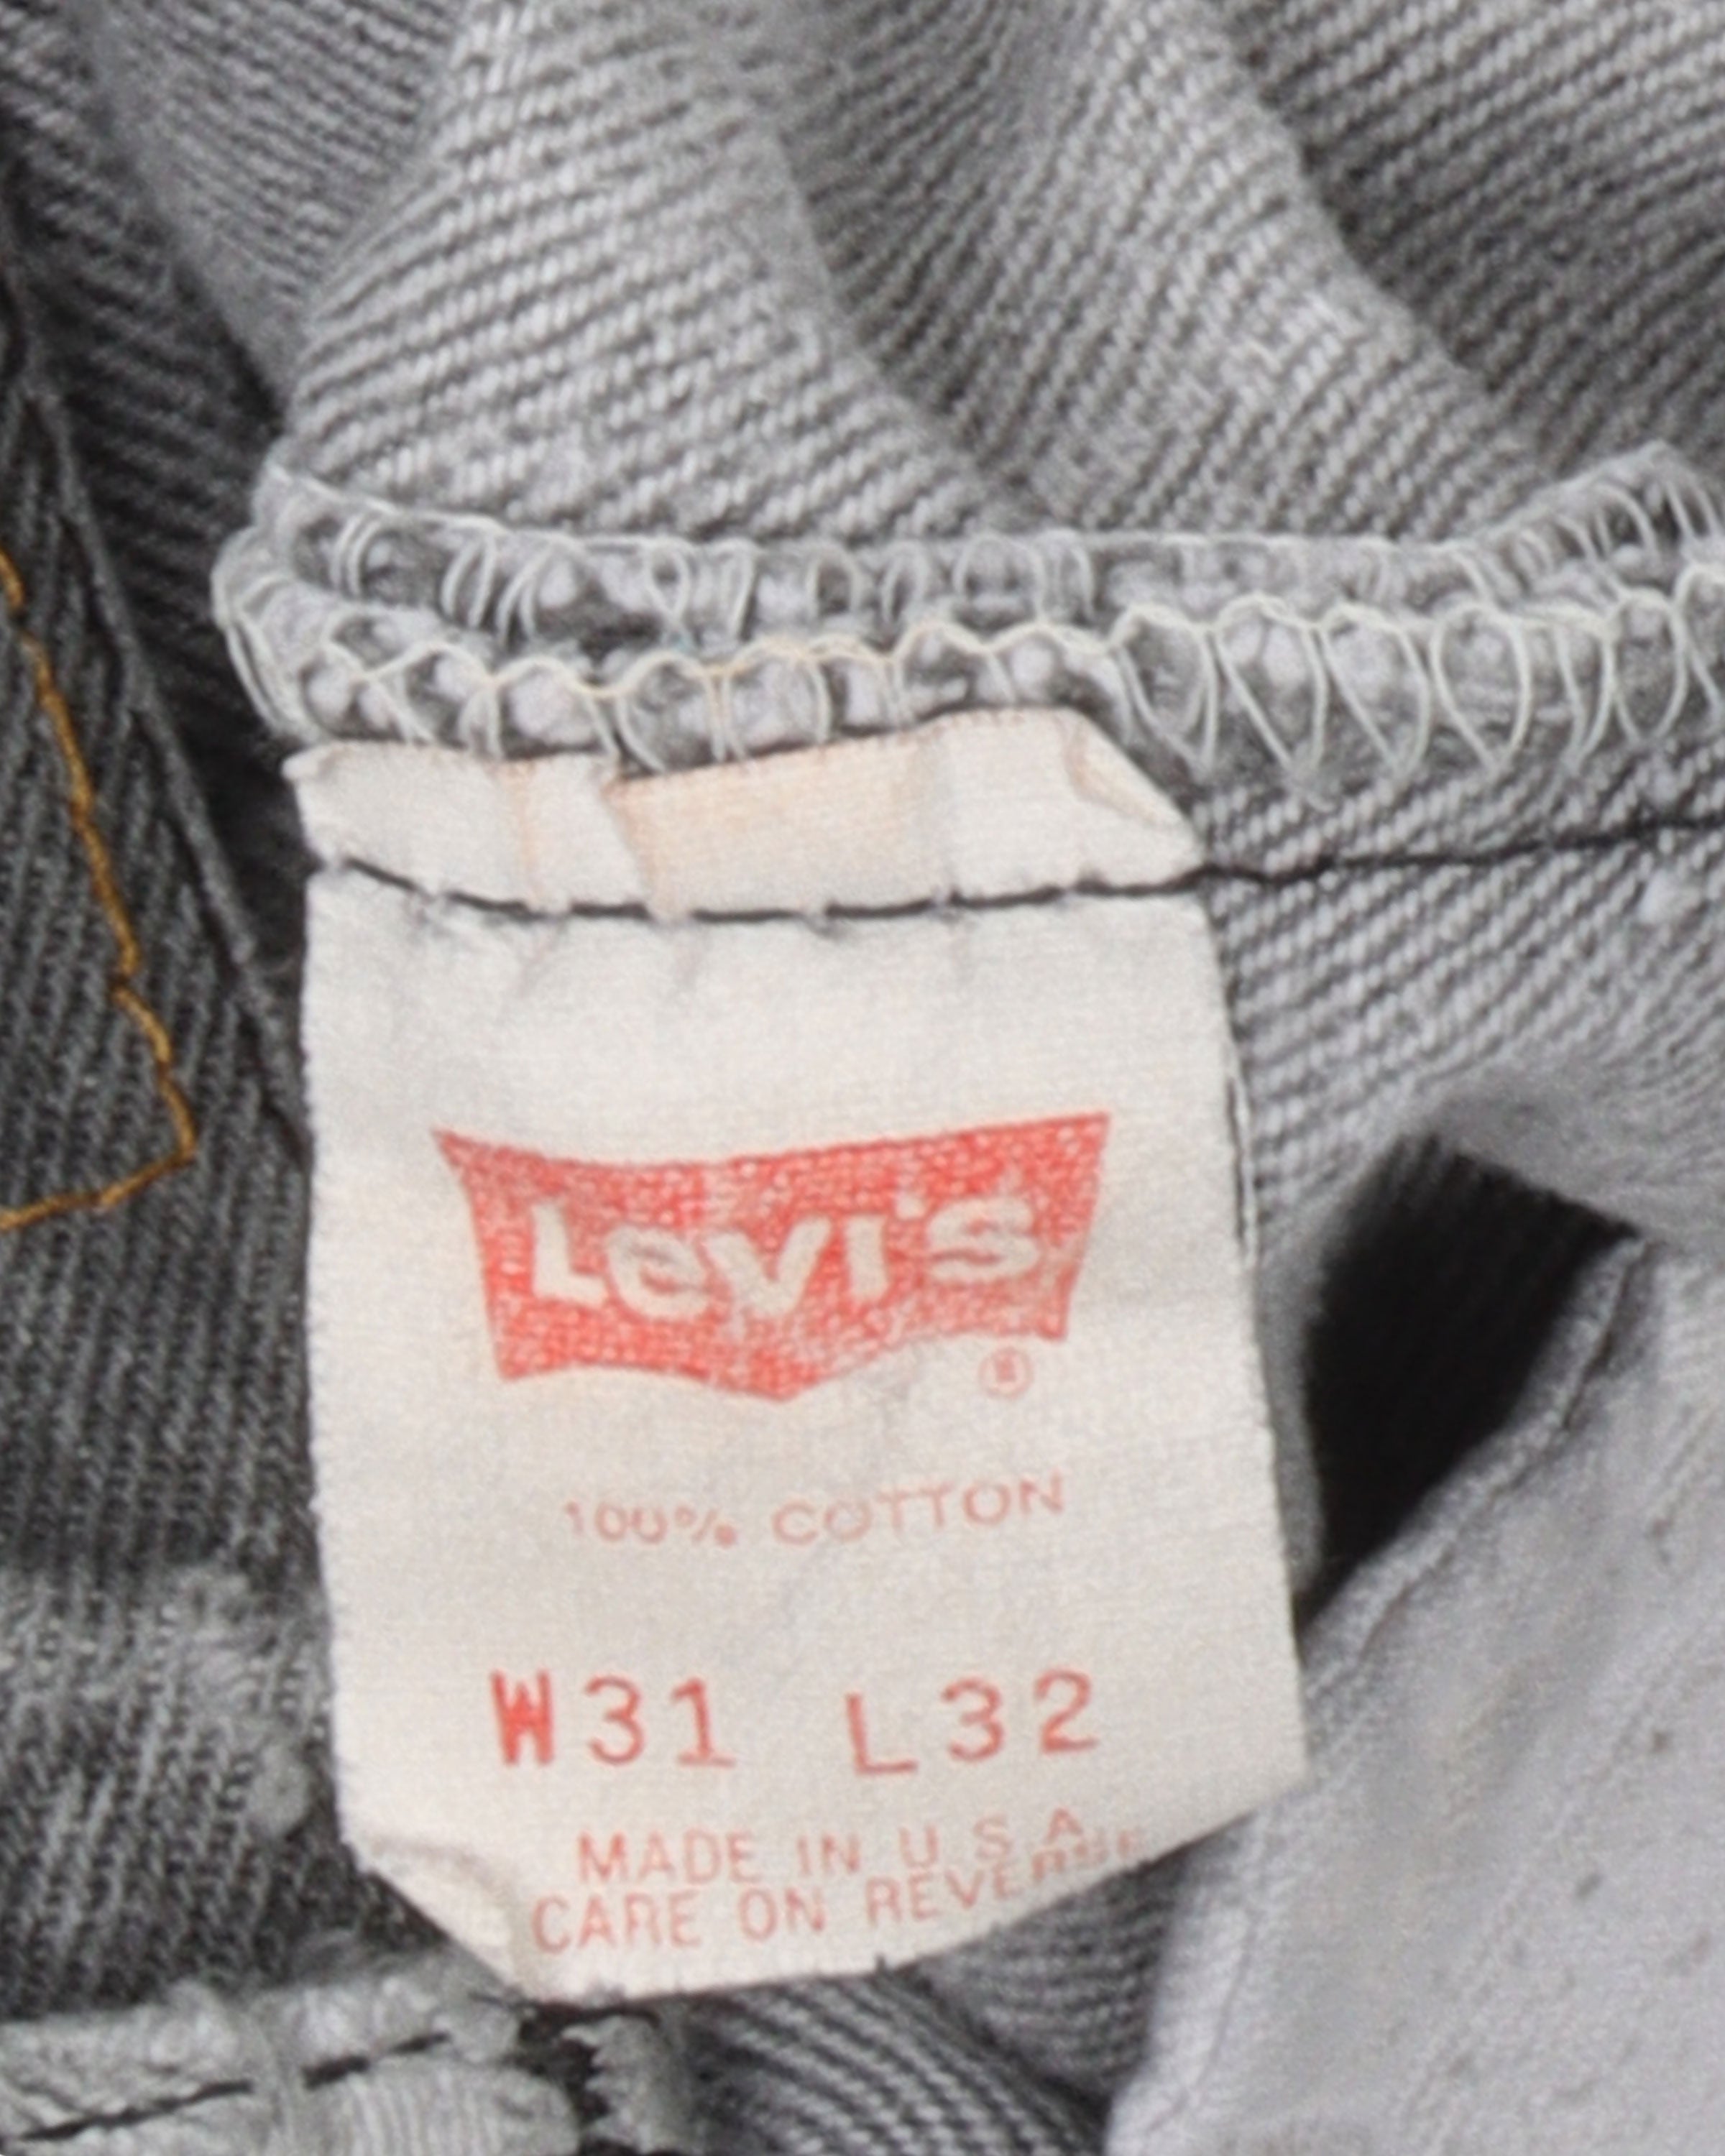 Levi's 501 Jeans Repaired by Dusted